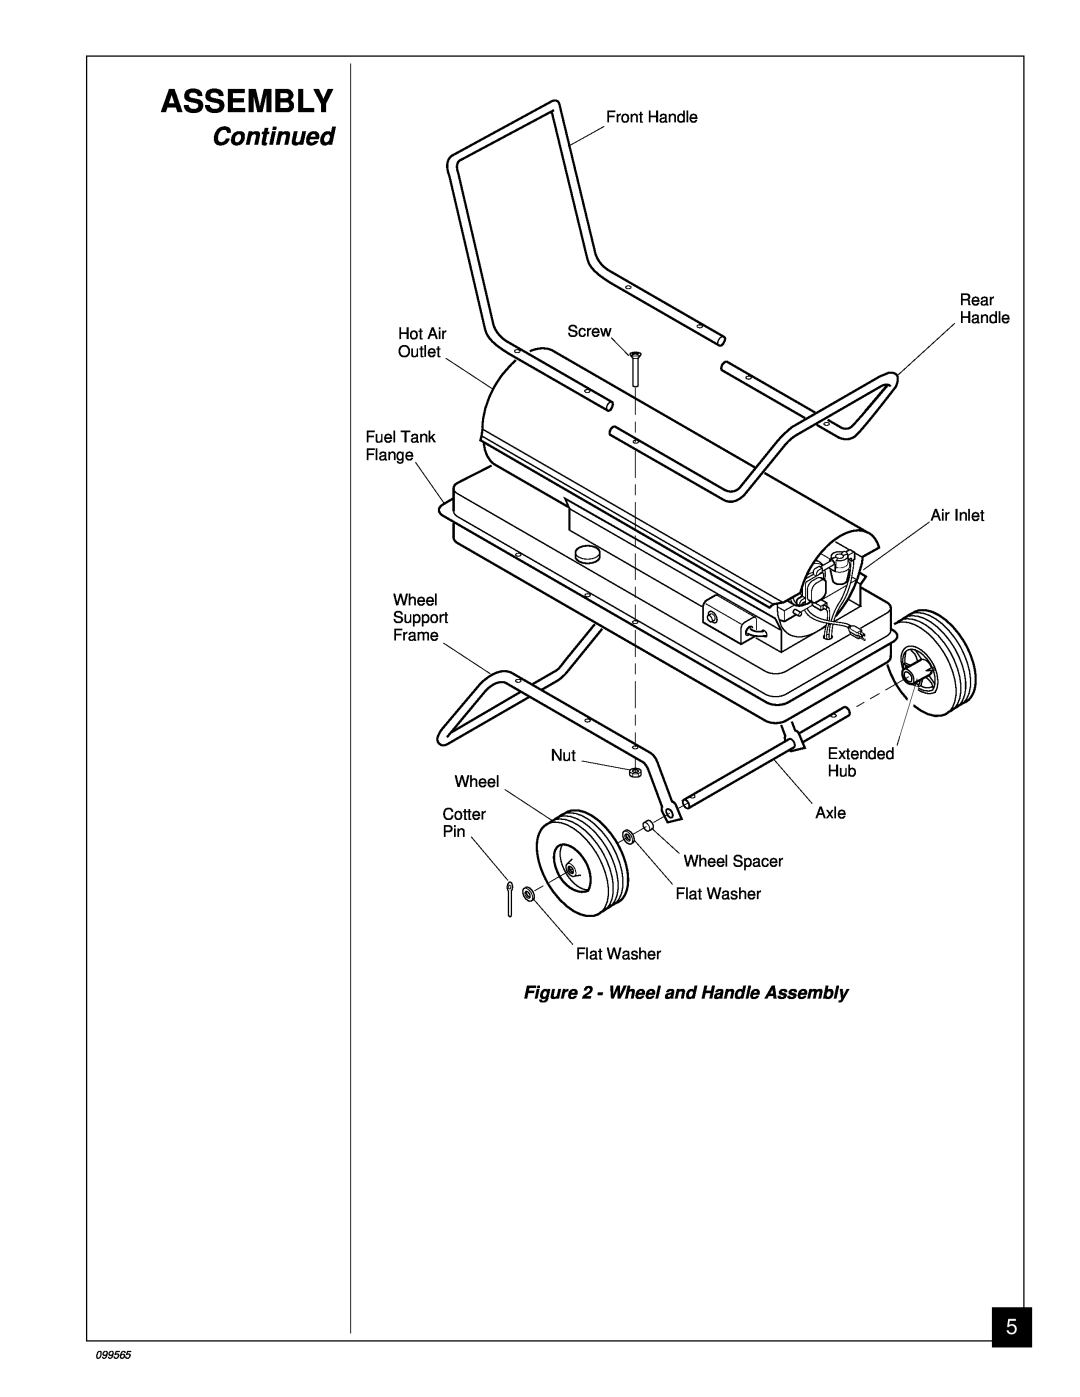 Master Lock B350EAI owner manual Continued, Wheel and Handle Assembly 